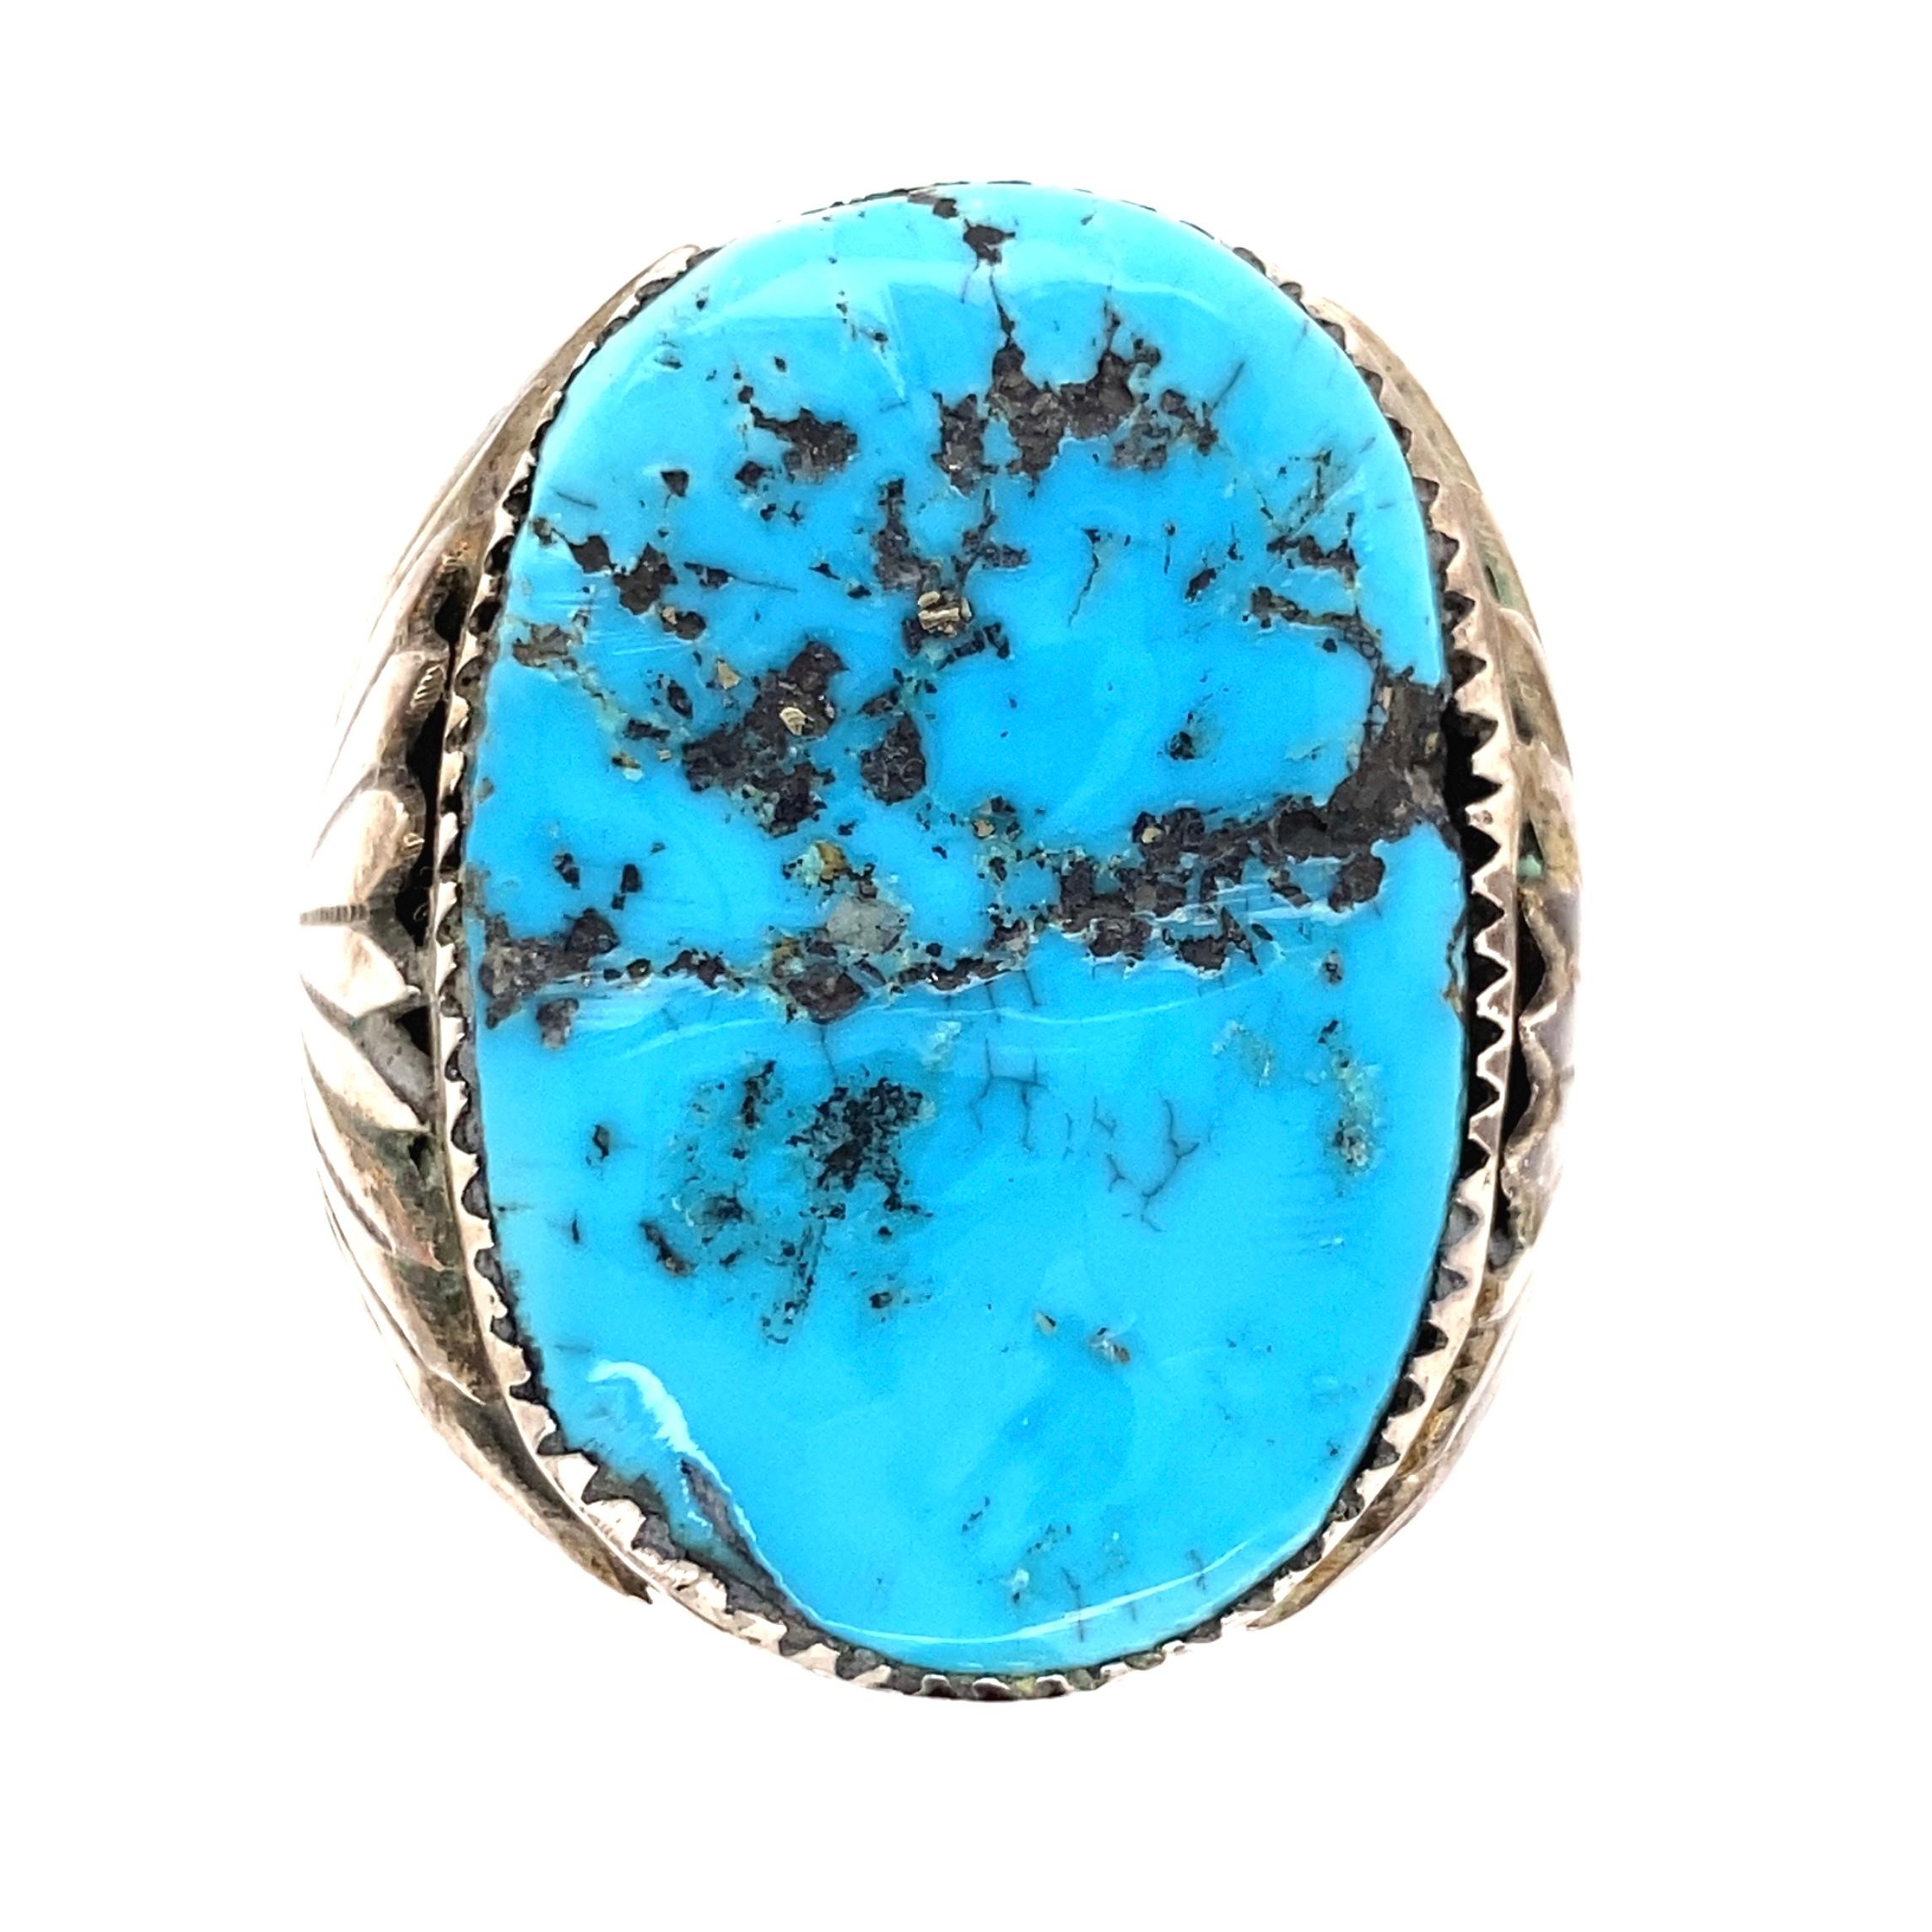 Modernist Native American Navajo Signed RLB Men's Turquoise Nugget Sterling Silver Ring